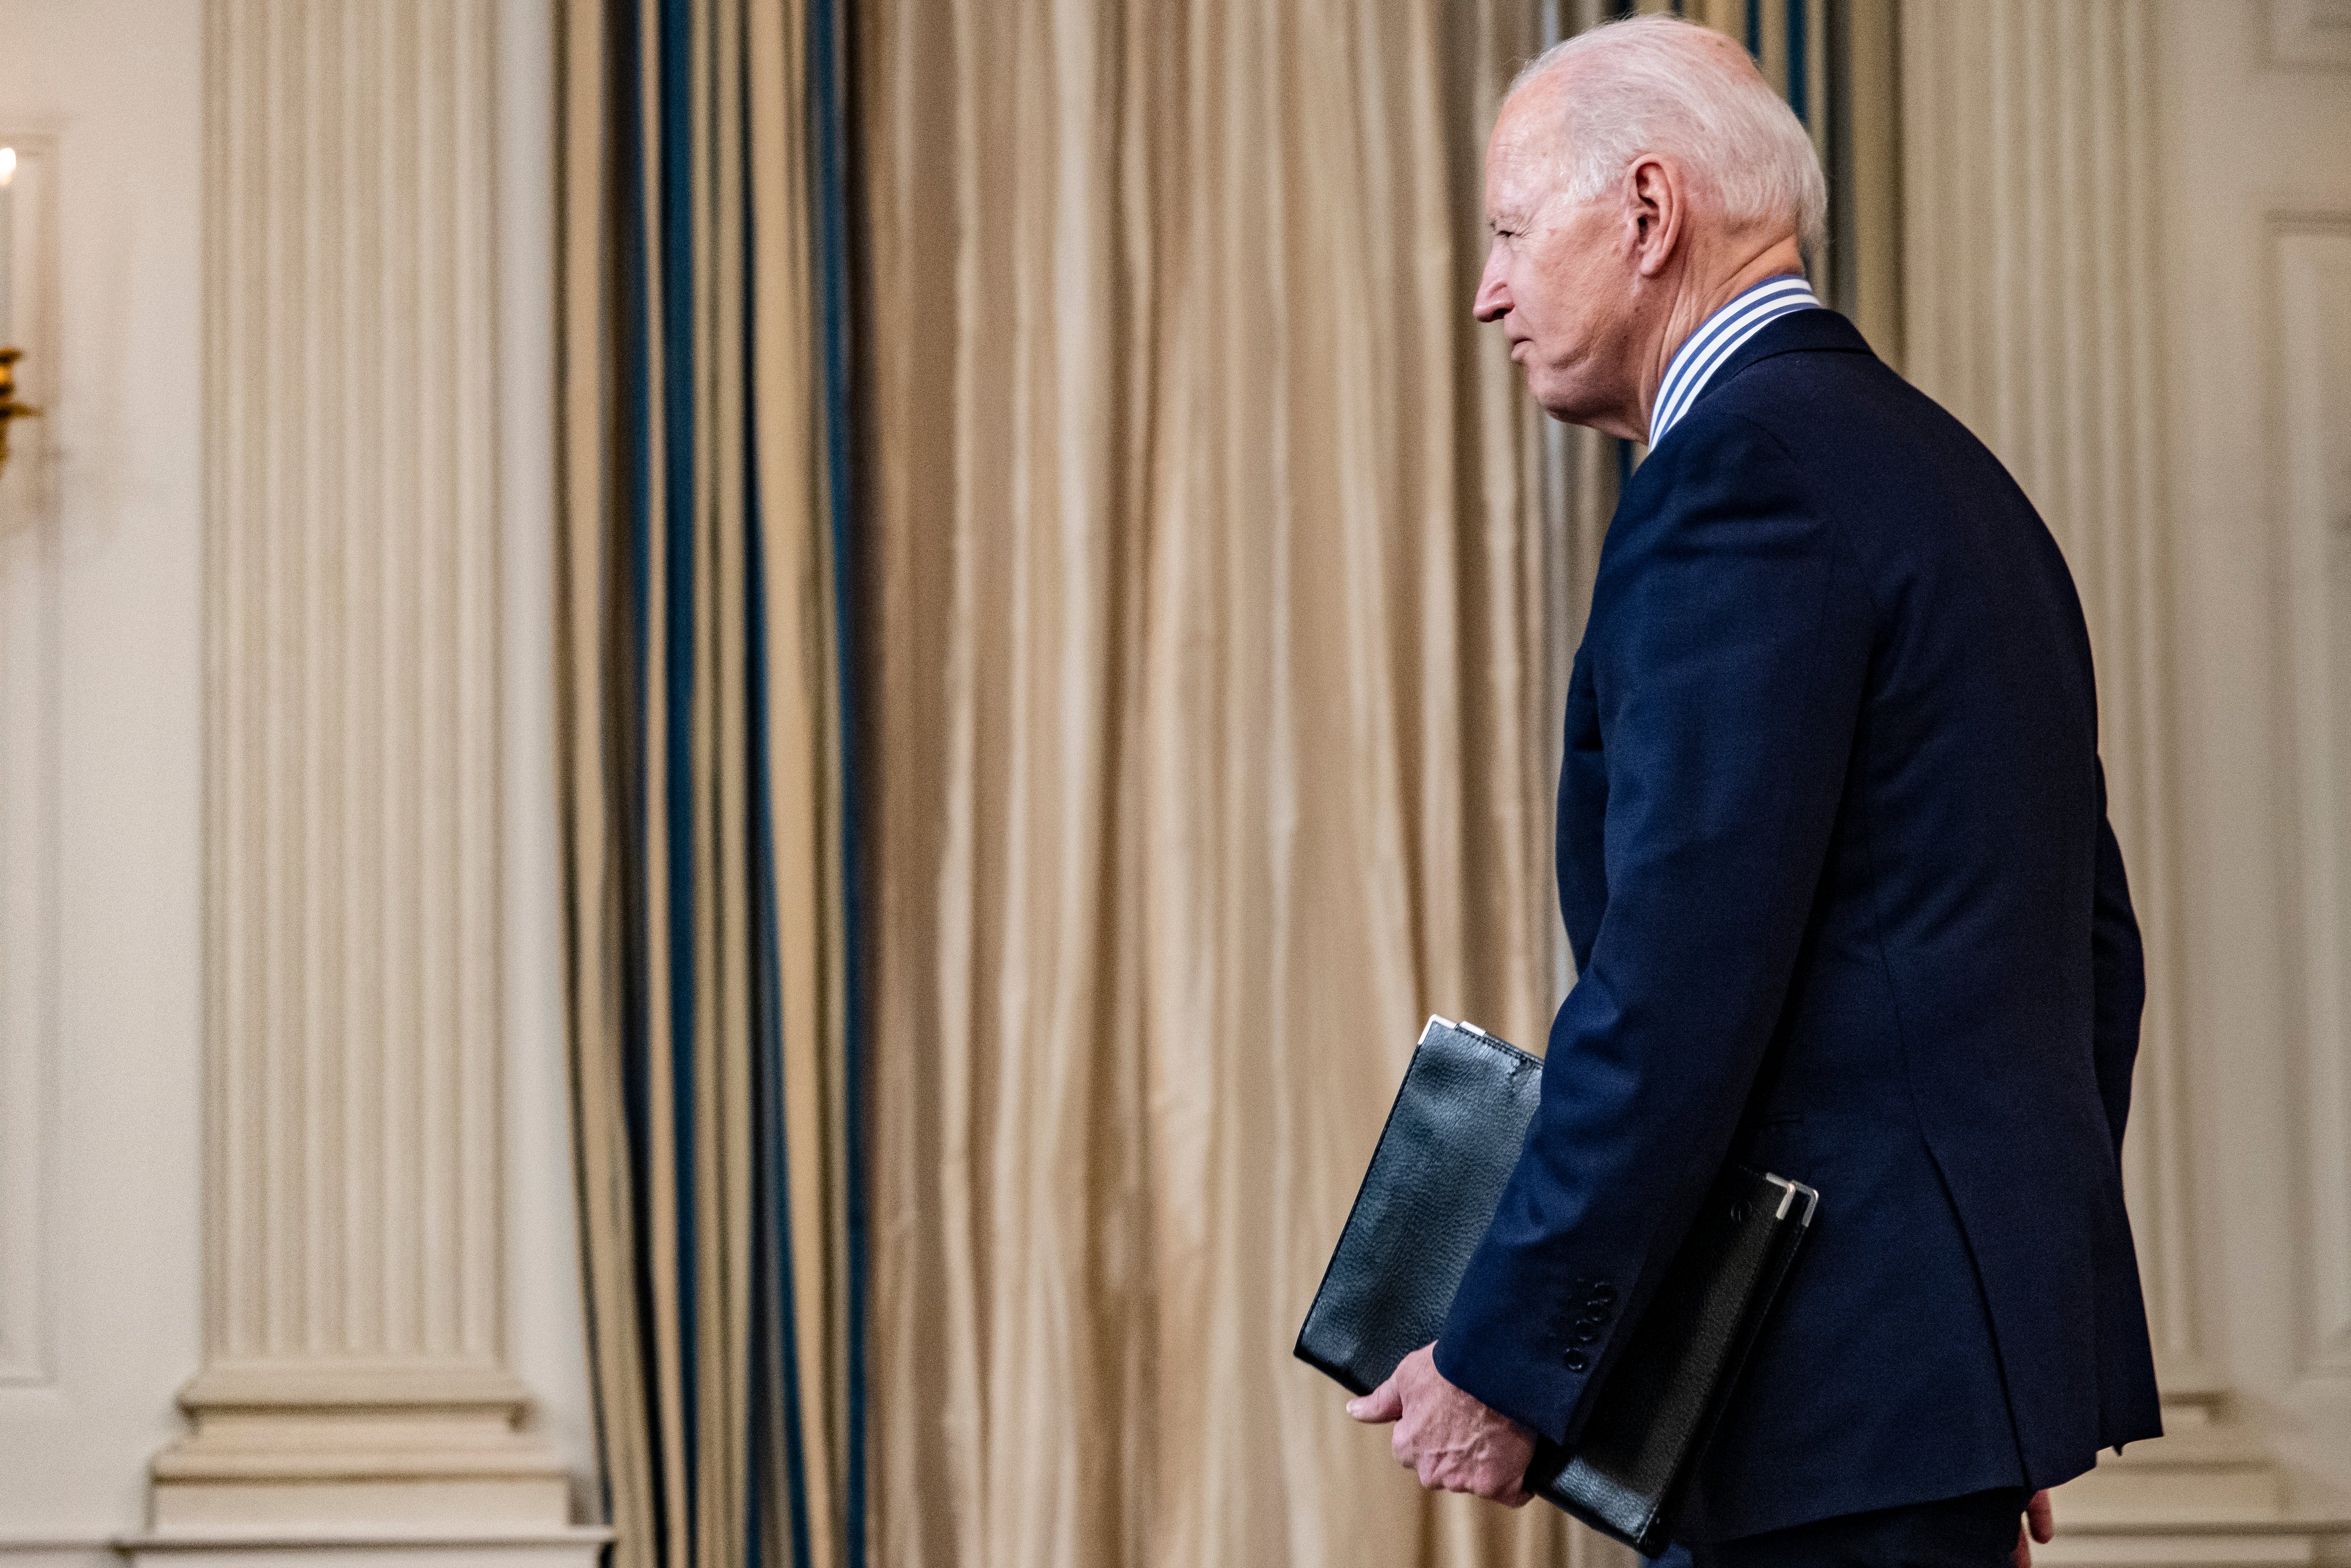 Joe Biden has notched his first major legislative accomplishment with the $1.9trn Covid relief package.